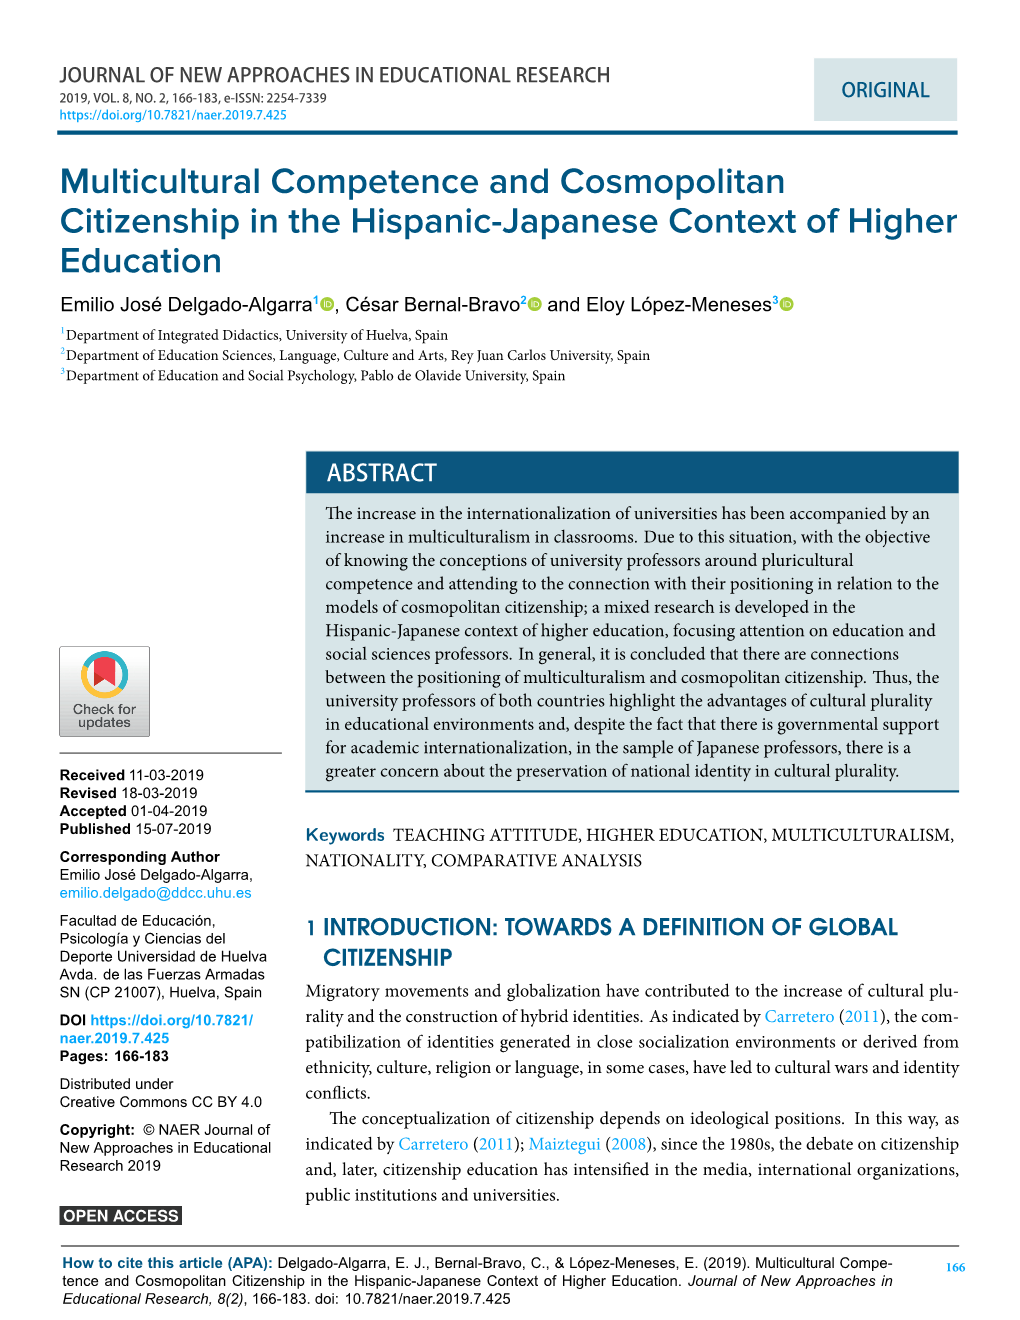 Multicultural Competence and Cosmopolitan Citizenship in the Hispanic-Japanese Context of Higher Education